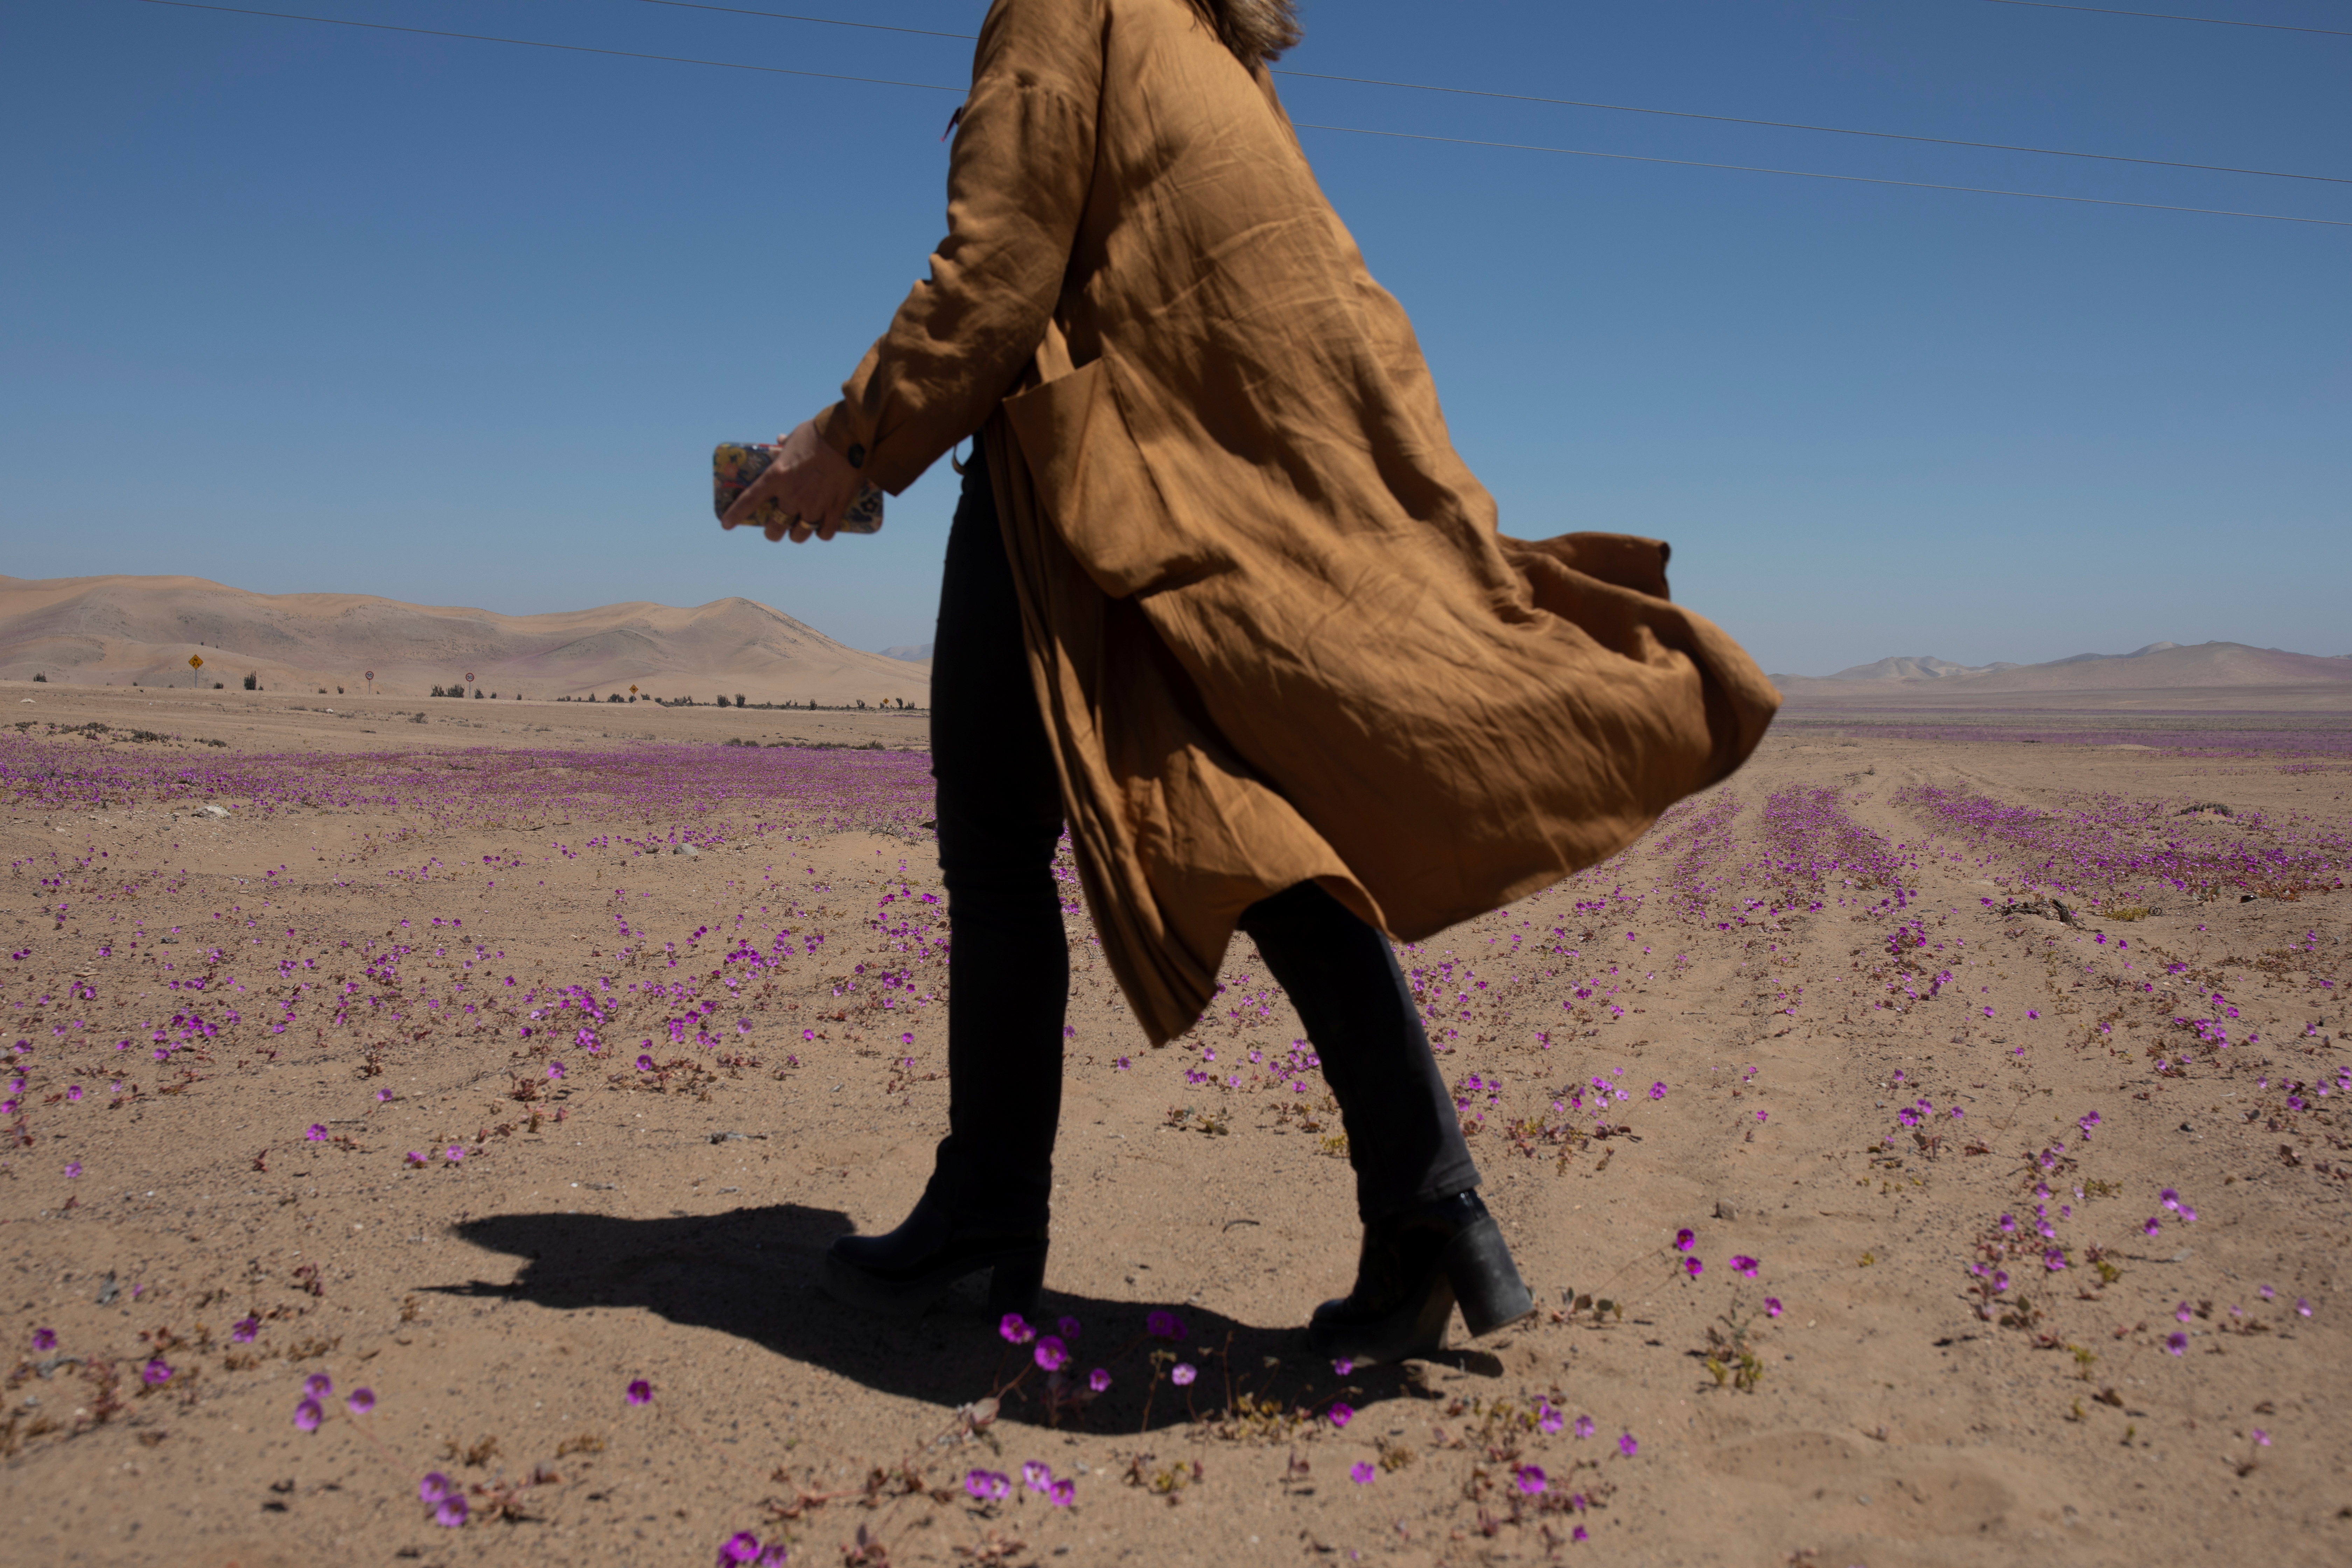 Atacama desert during 'Desierto Florido', a natural phenomenon that fill with flowers the driest desert in the world in Copiapo